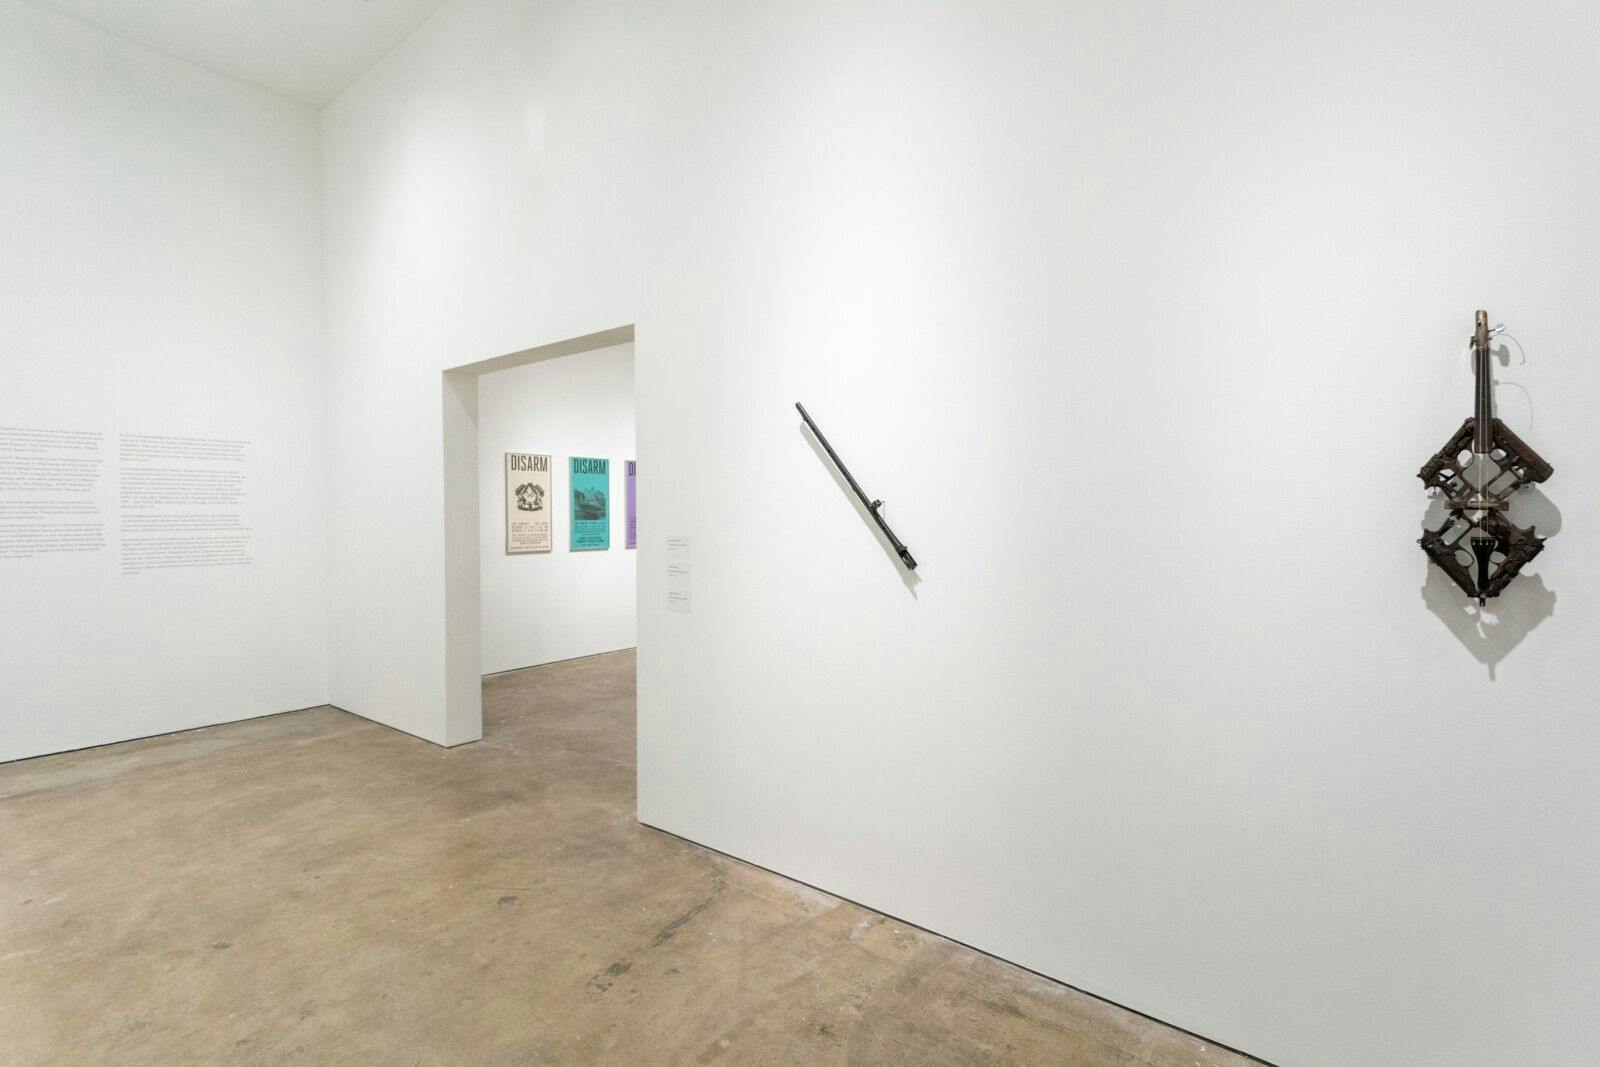 Pedro Reyes, DIRECT ACTION, 2023, Installation view, image courtesy of SITE Santa Fe, photo by Shayla Blatchford-291-HDR